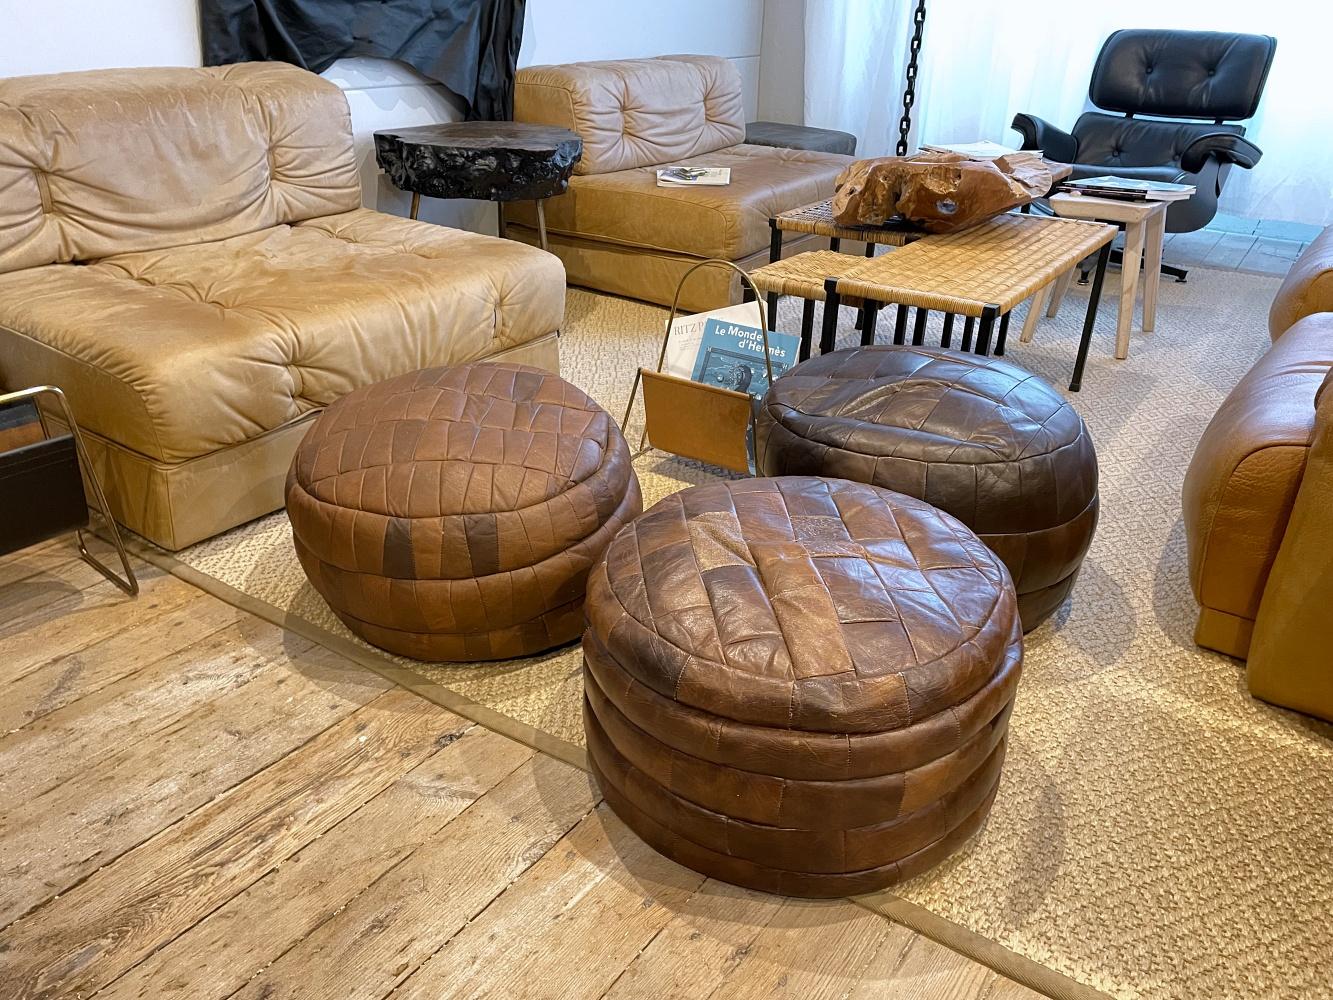 Unique and decorative handmade De Sede DS-80 pouf in Cognac brown. The pouf is in very good condition with lovely patina.


